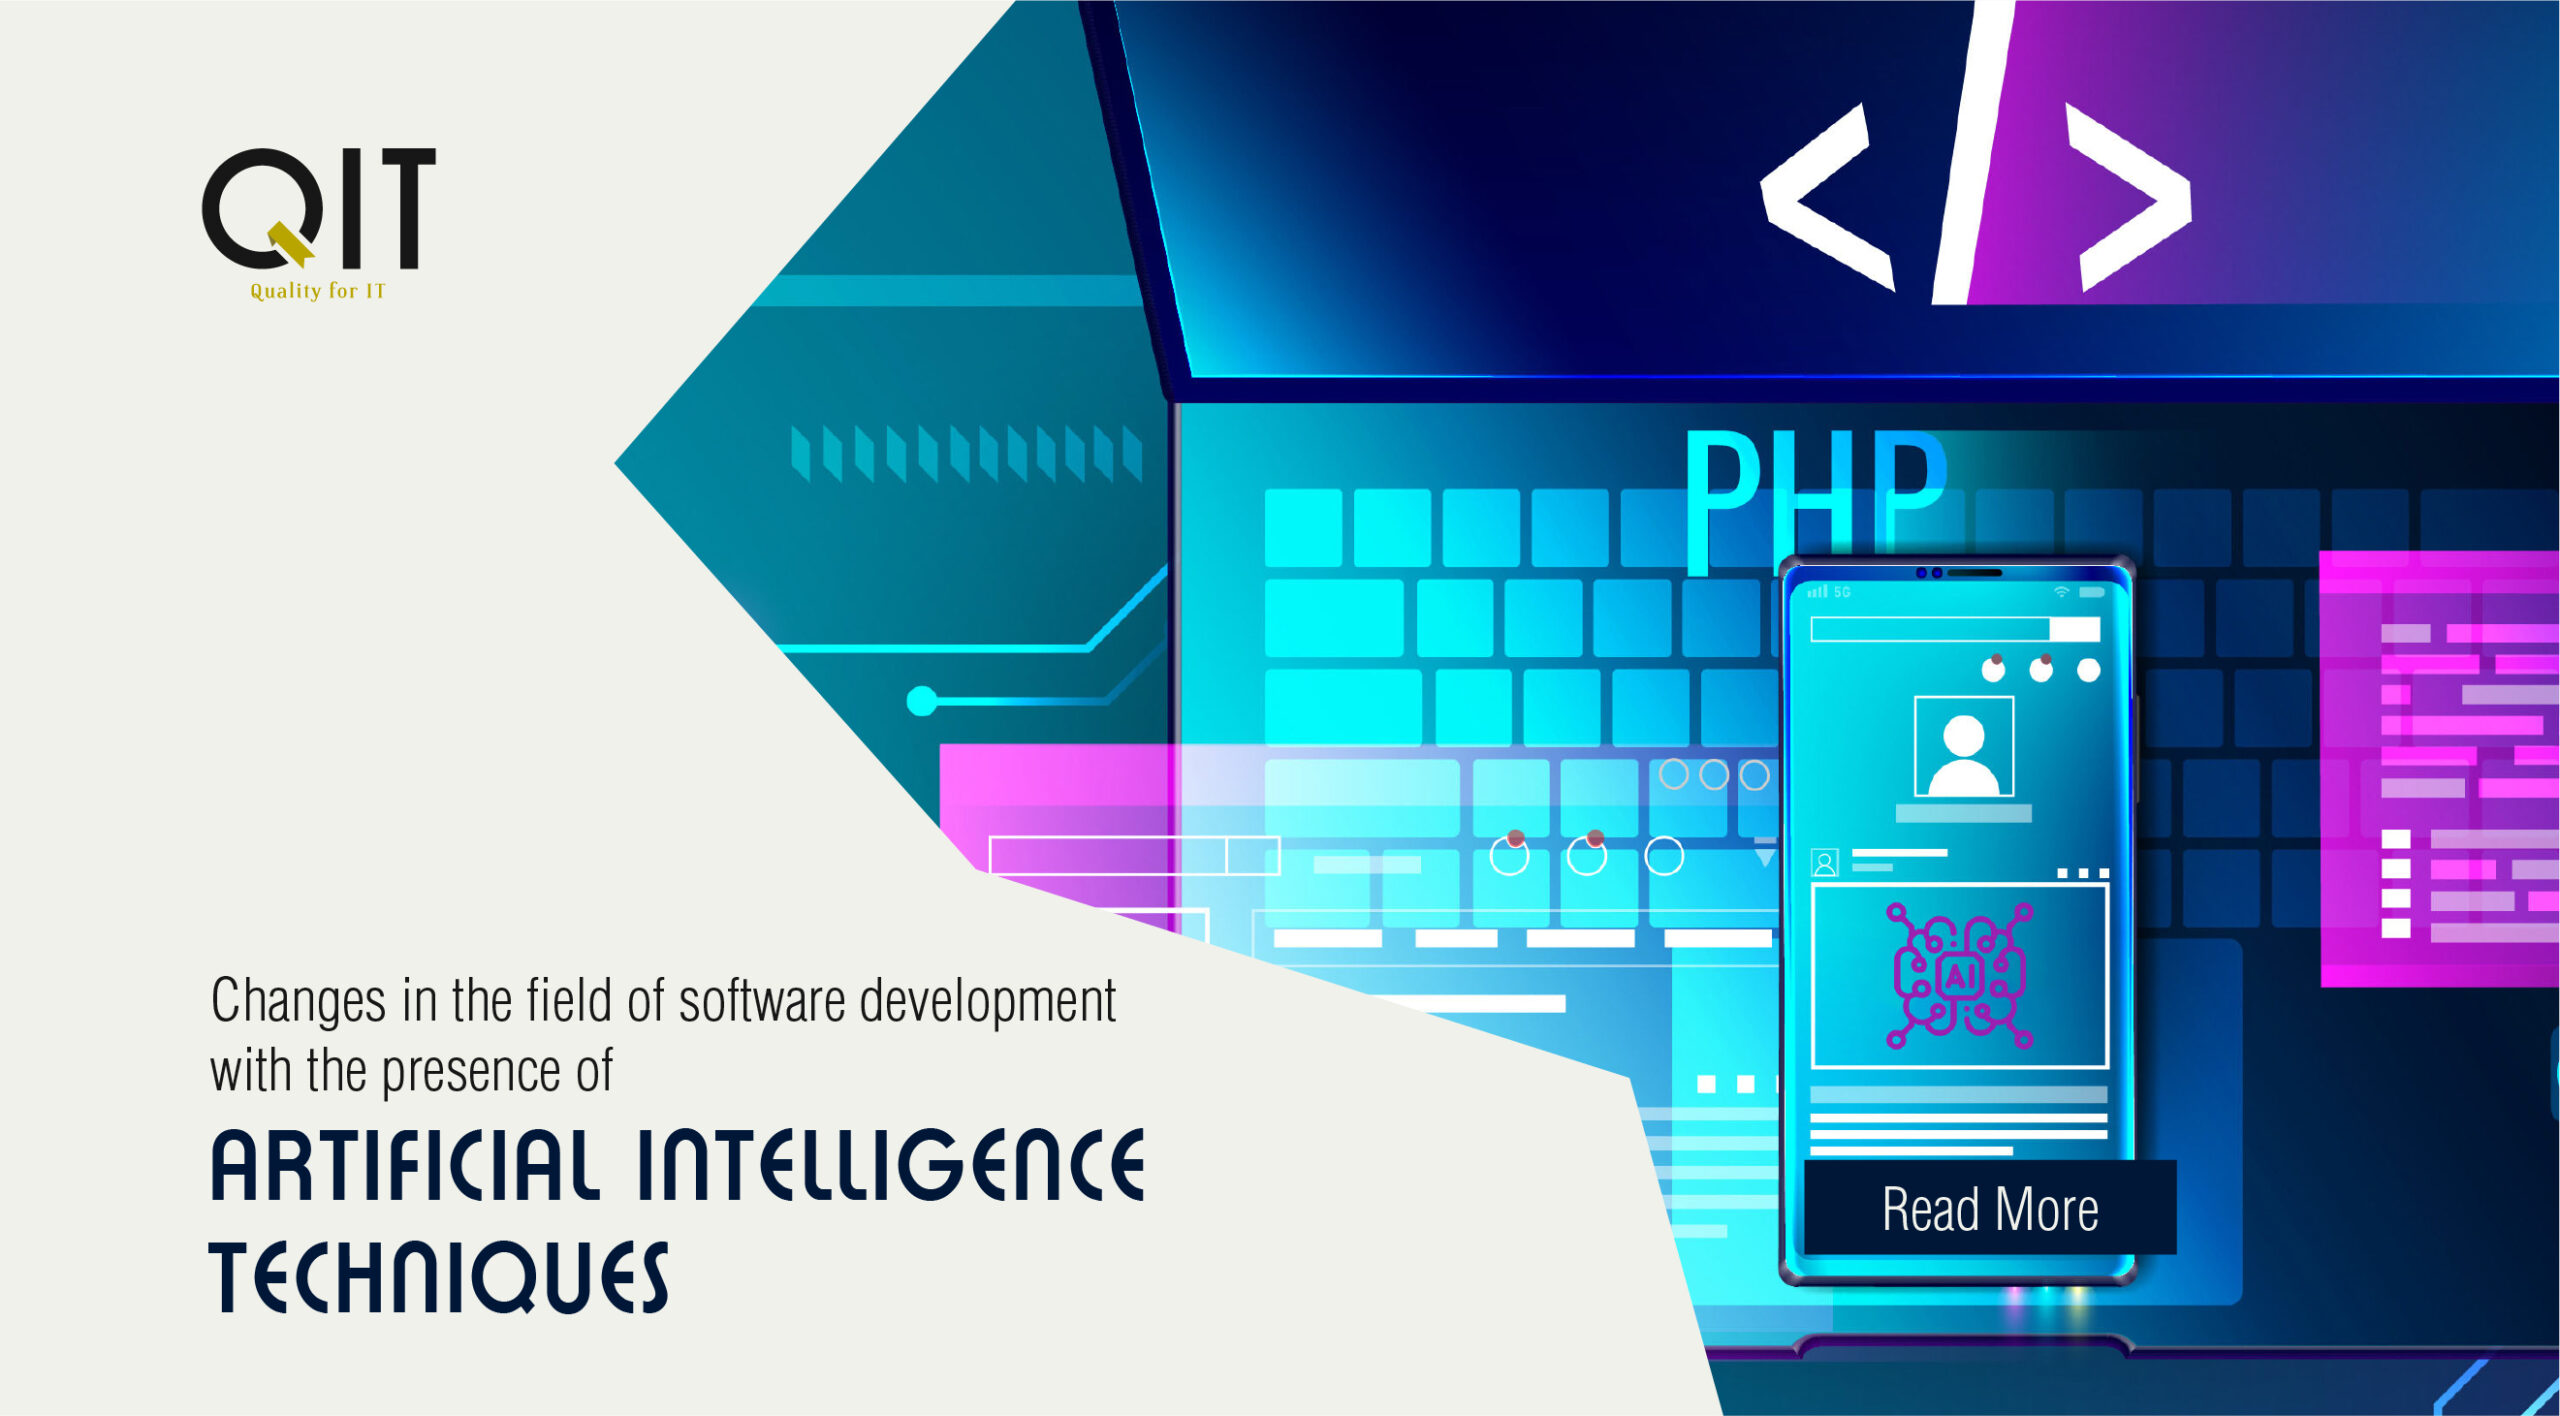 Changes in the field of software development with the presence of artificial intelligence techniques